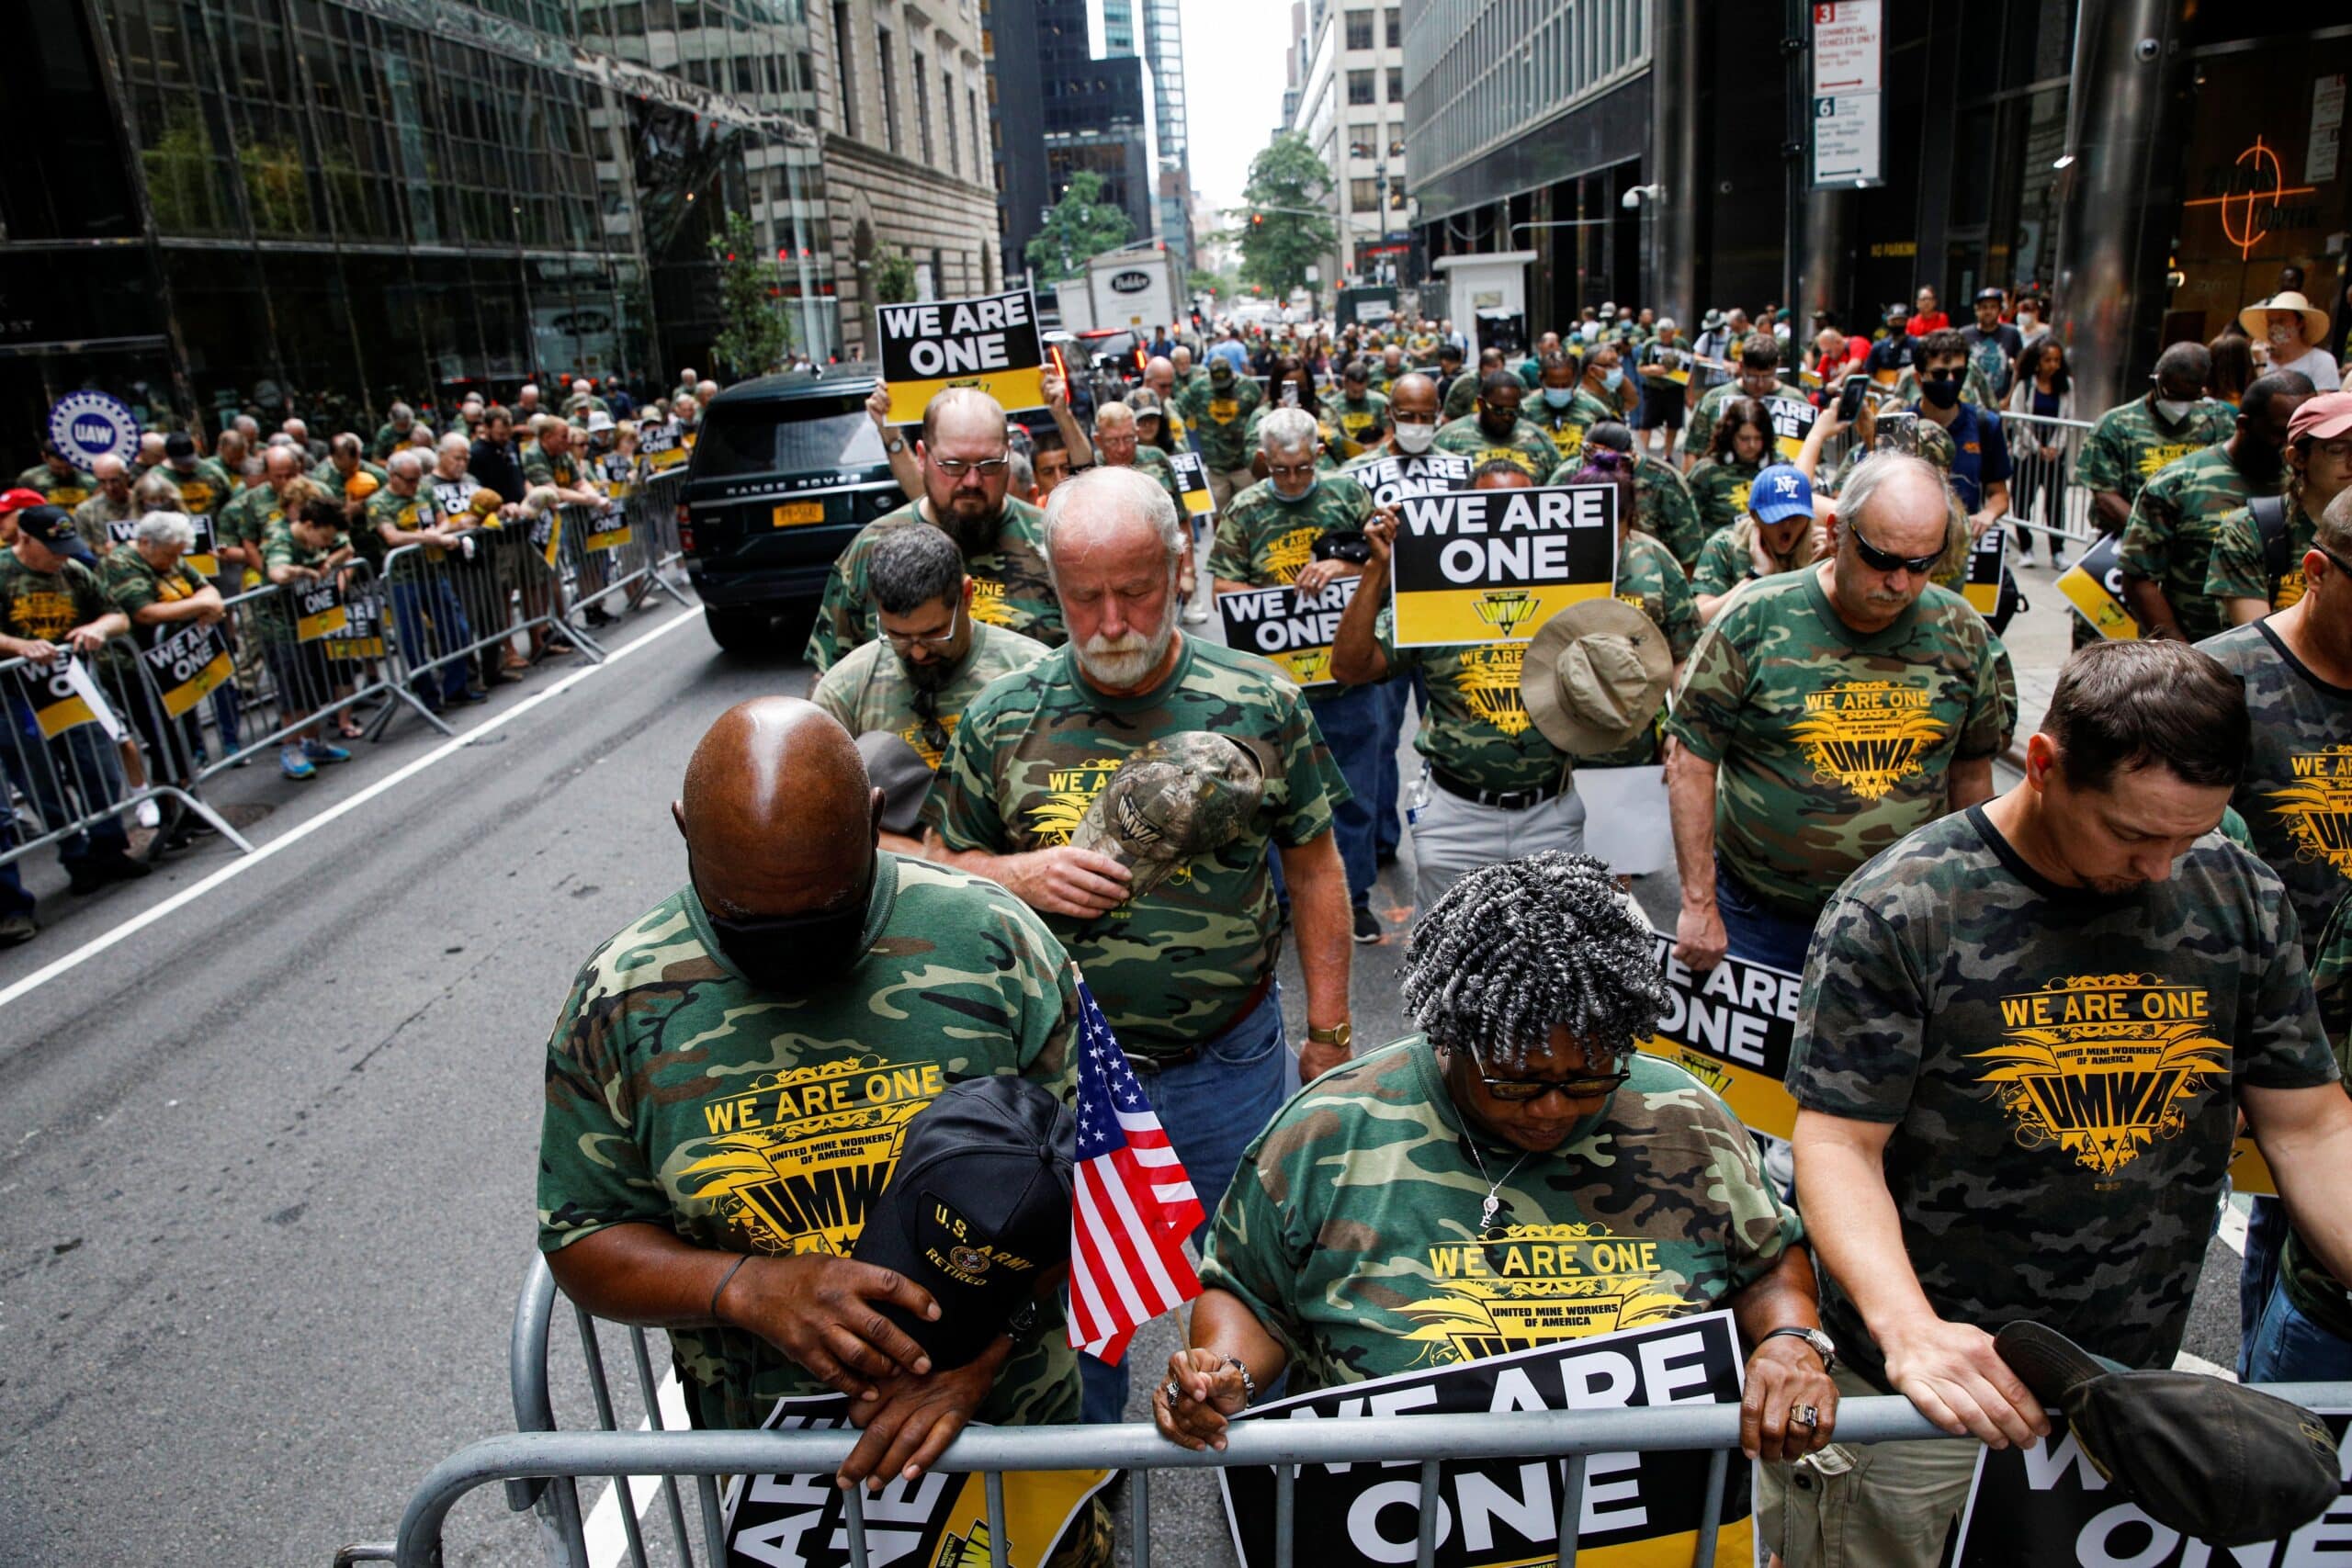 Members of United Mine Workers of America and other labor leaders bow in prayer while picketing July 28, 2021, outside BlackRock's headquarters in New York City as part of the union's strike at Warrior Met Coal Mine. (OSV News photo/Brendan McDermid, Reuters)